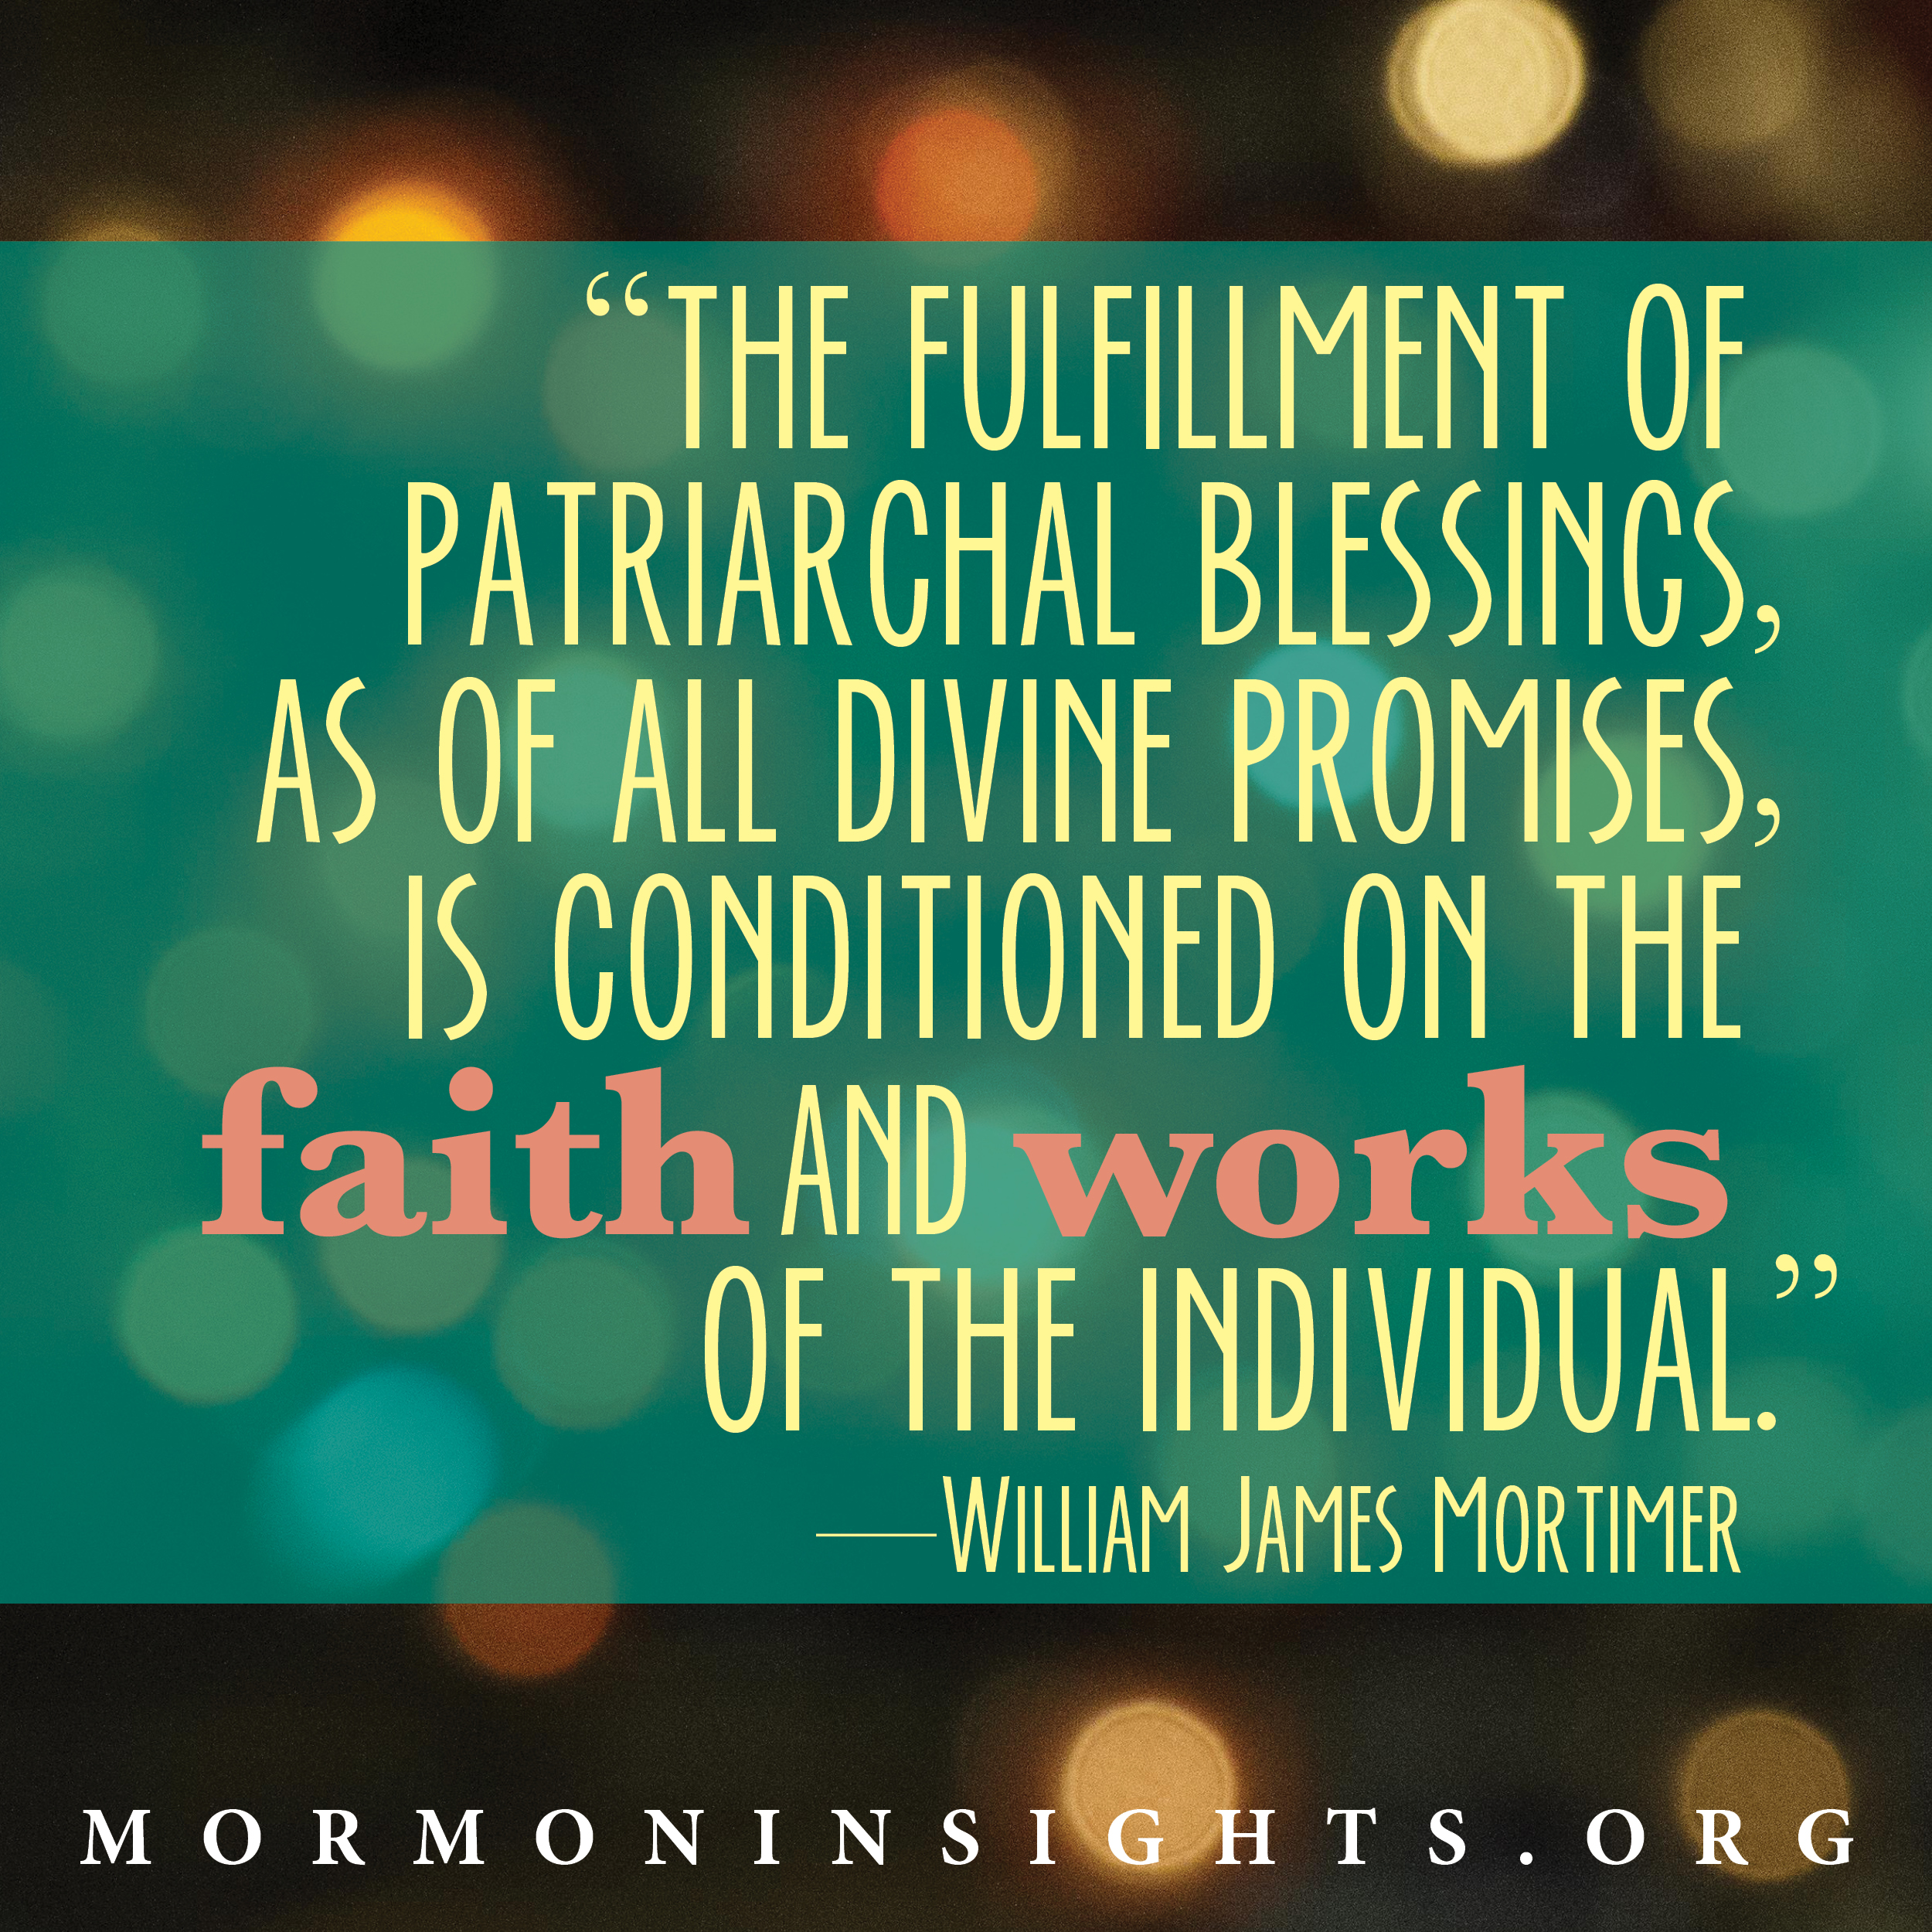 "The fulfillment of Patriarchal blessings, as of all divine promises, is conditioned on the faith and works of the individual."- William James Mortimer